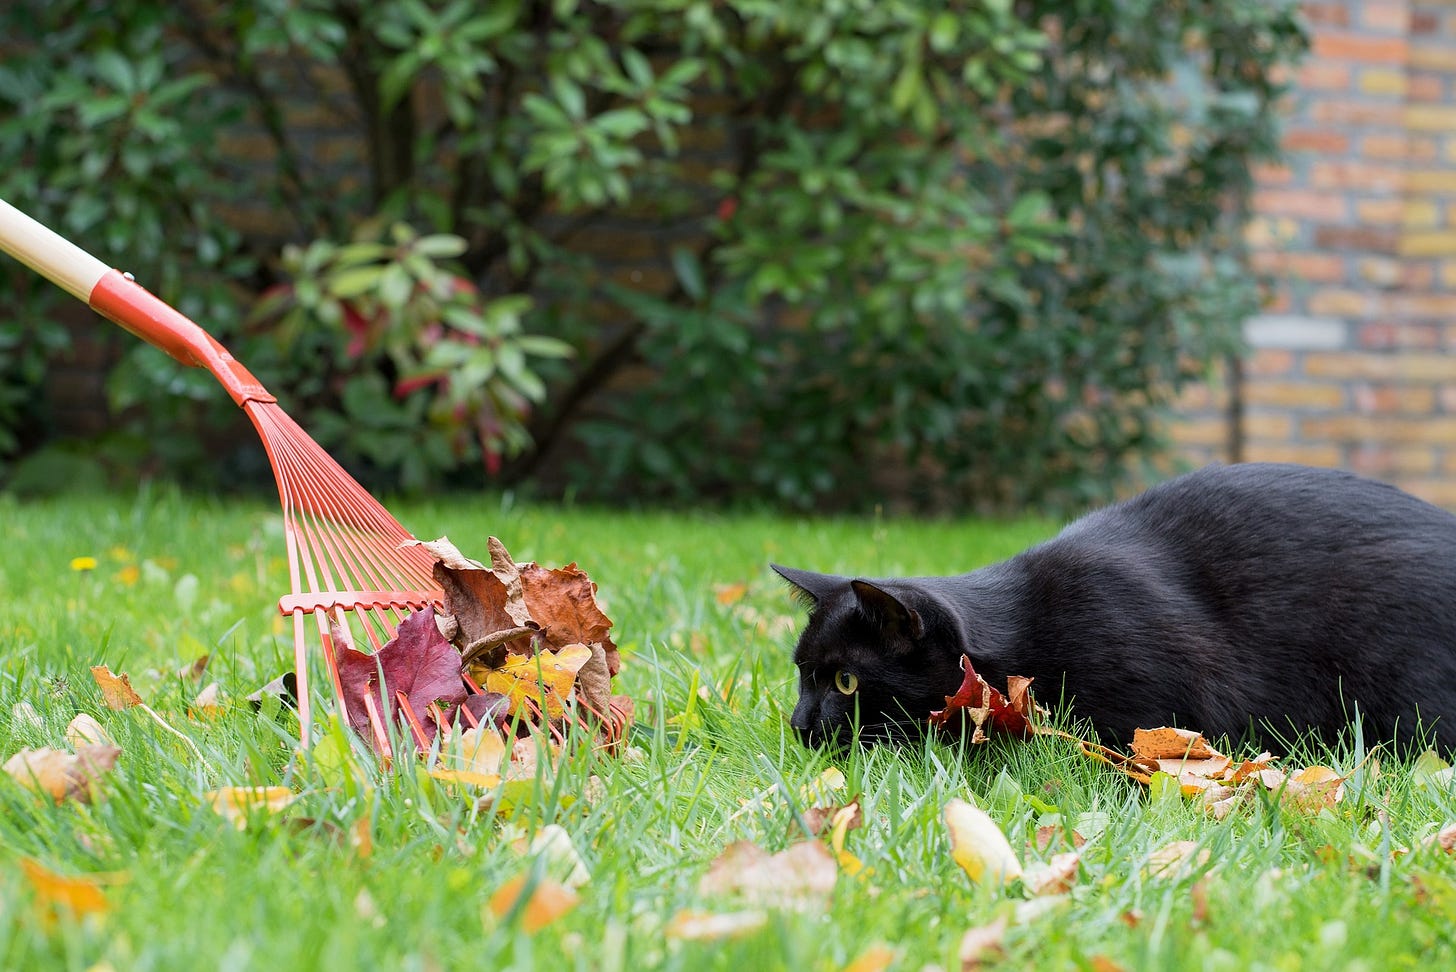 A black cat stares at a rake gathering leaves.